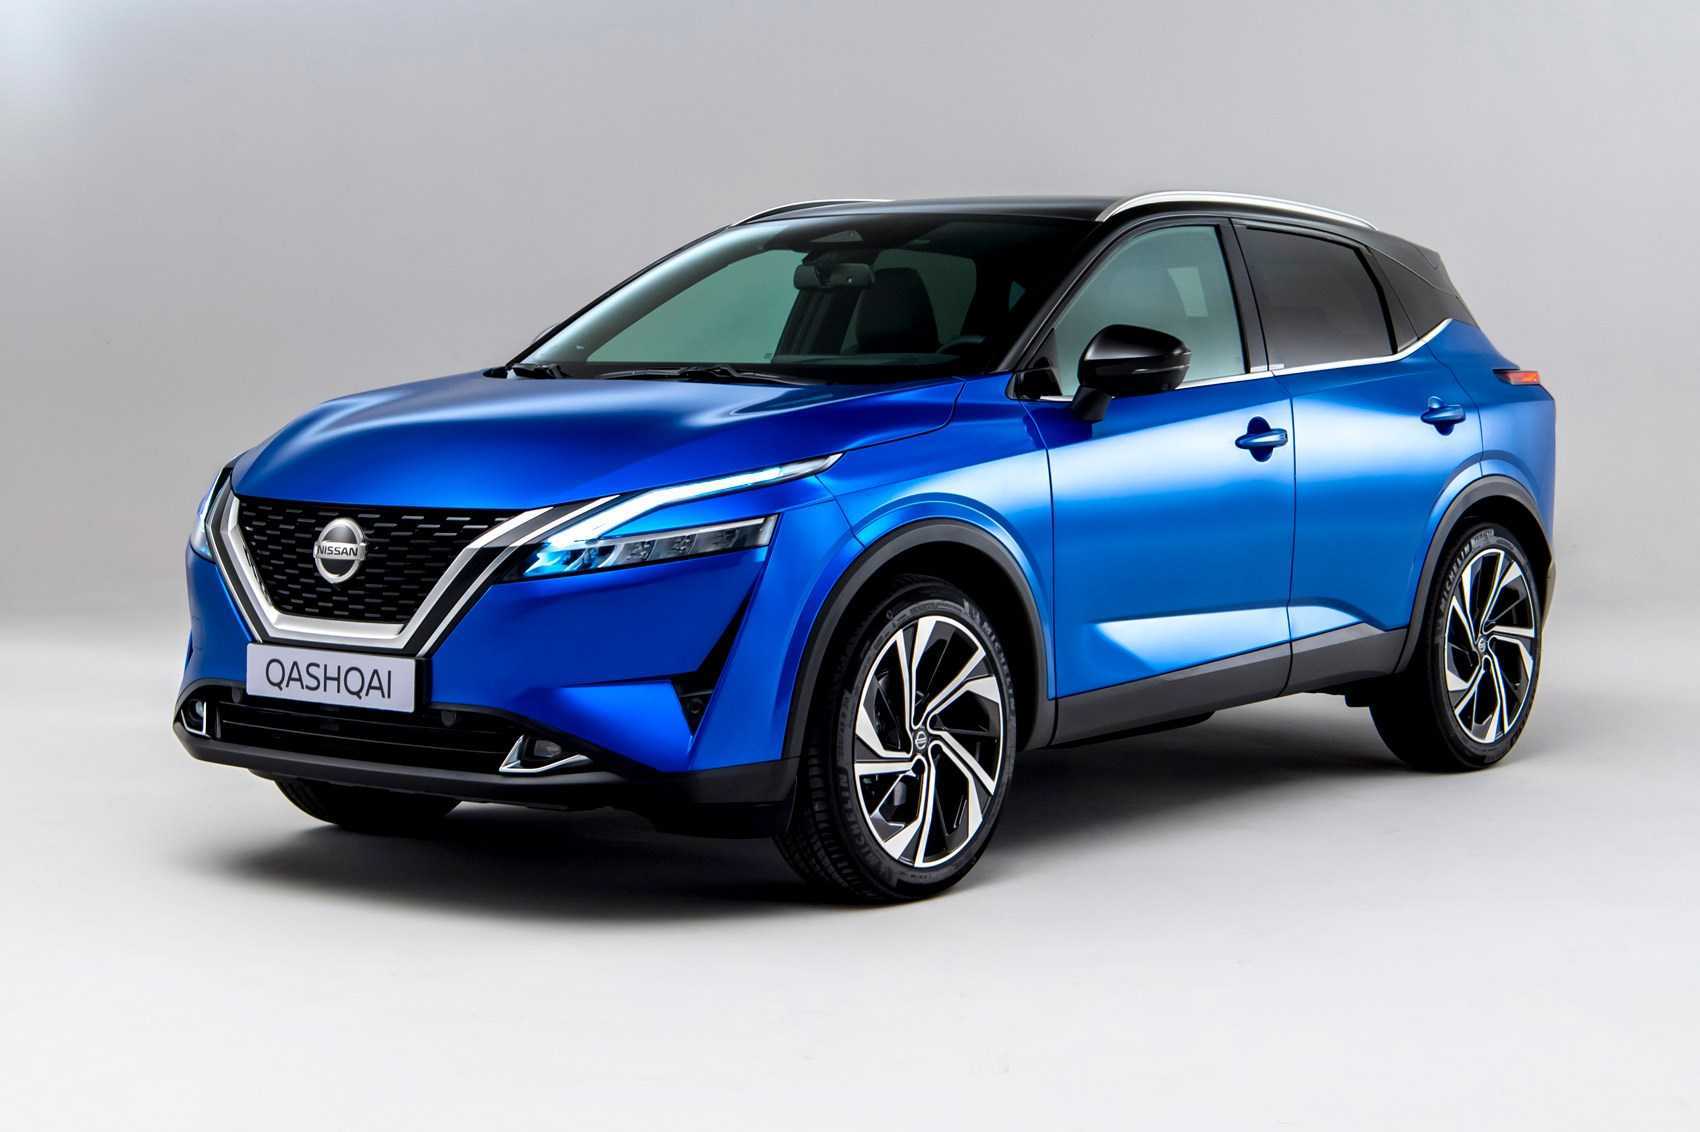 BRAND NEW NISSAN-pic_1